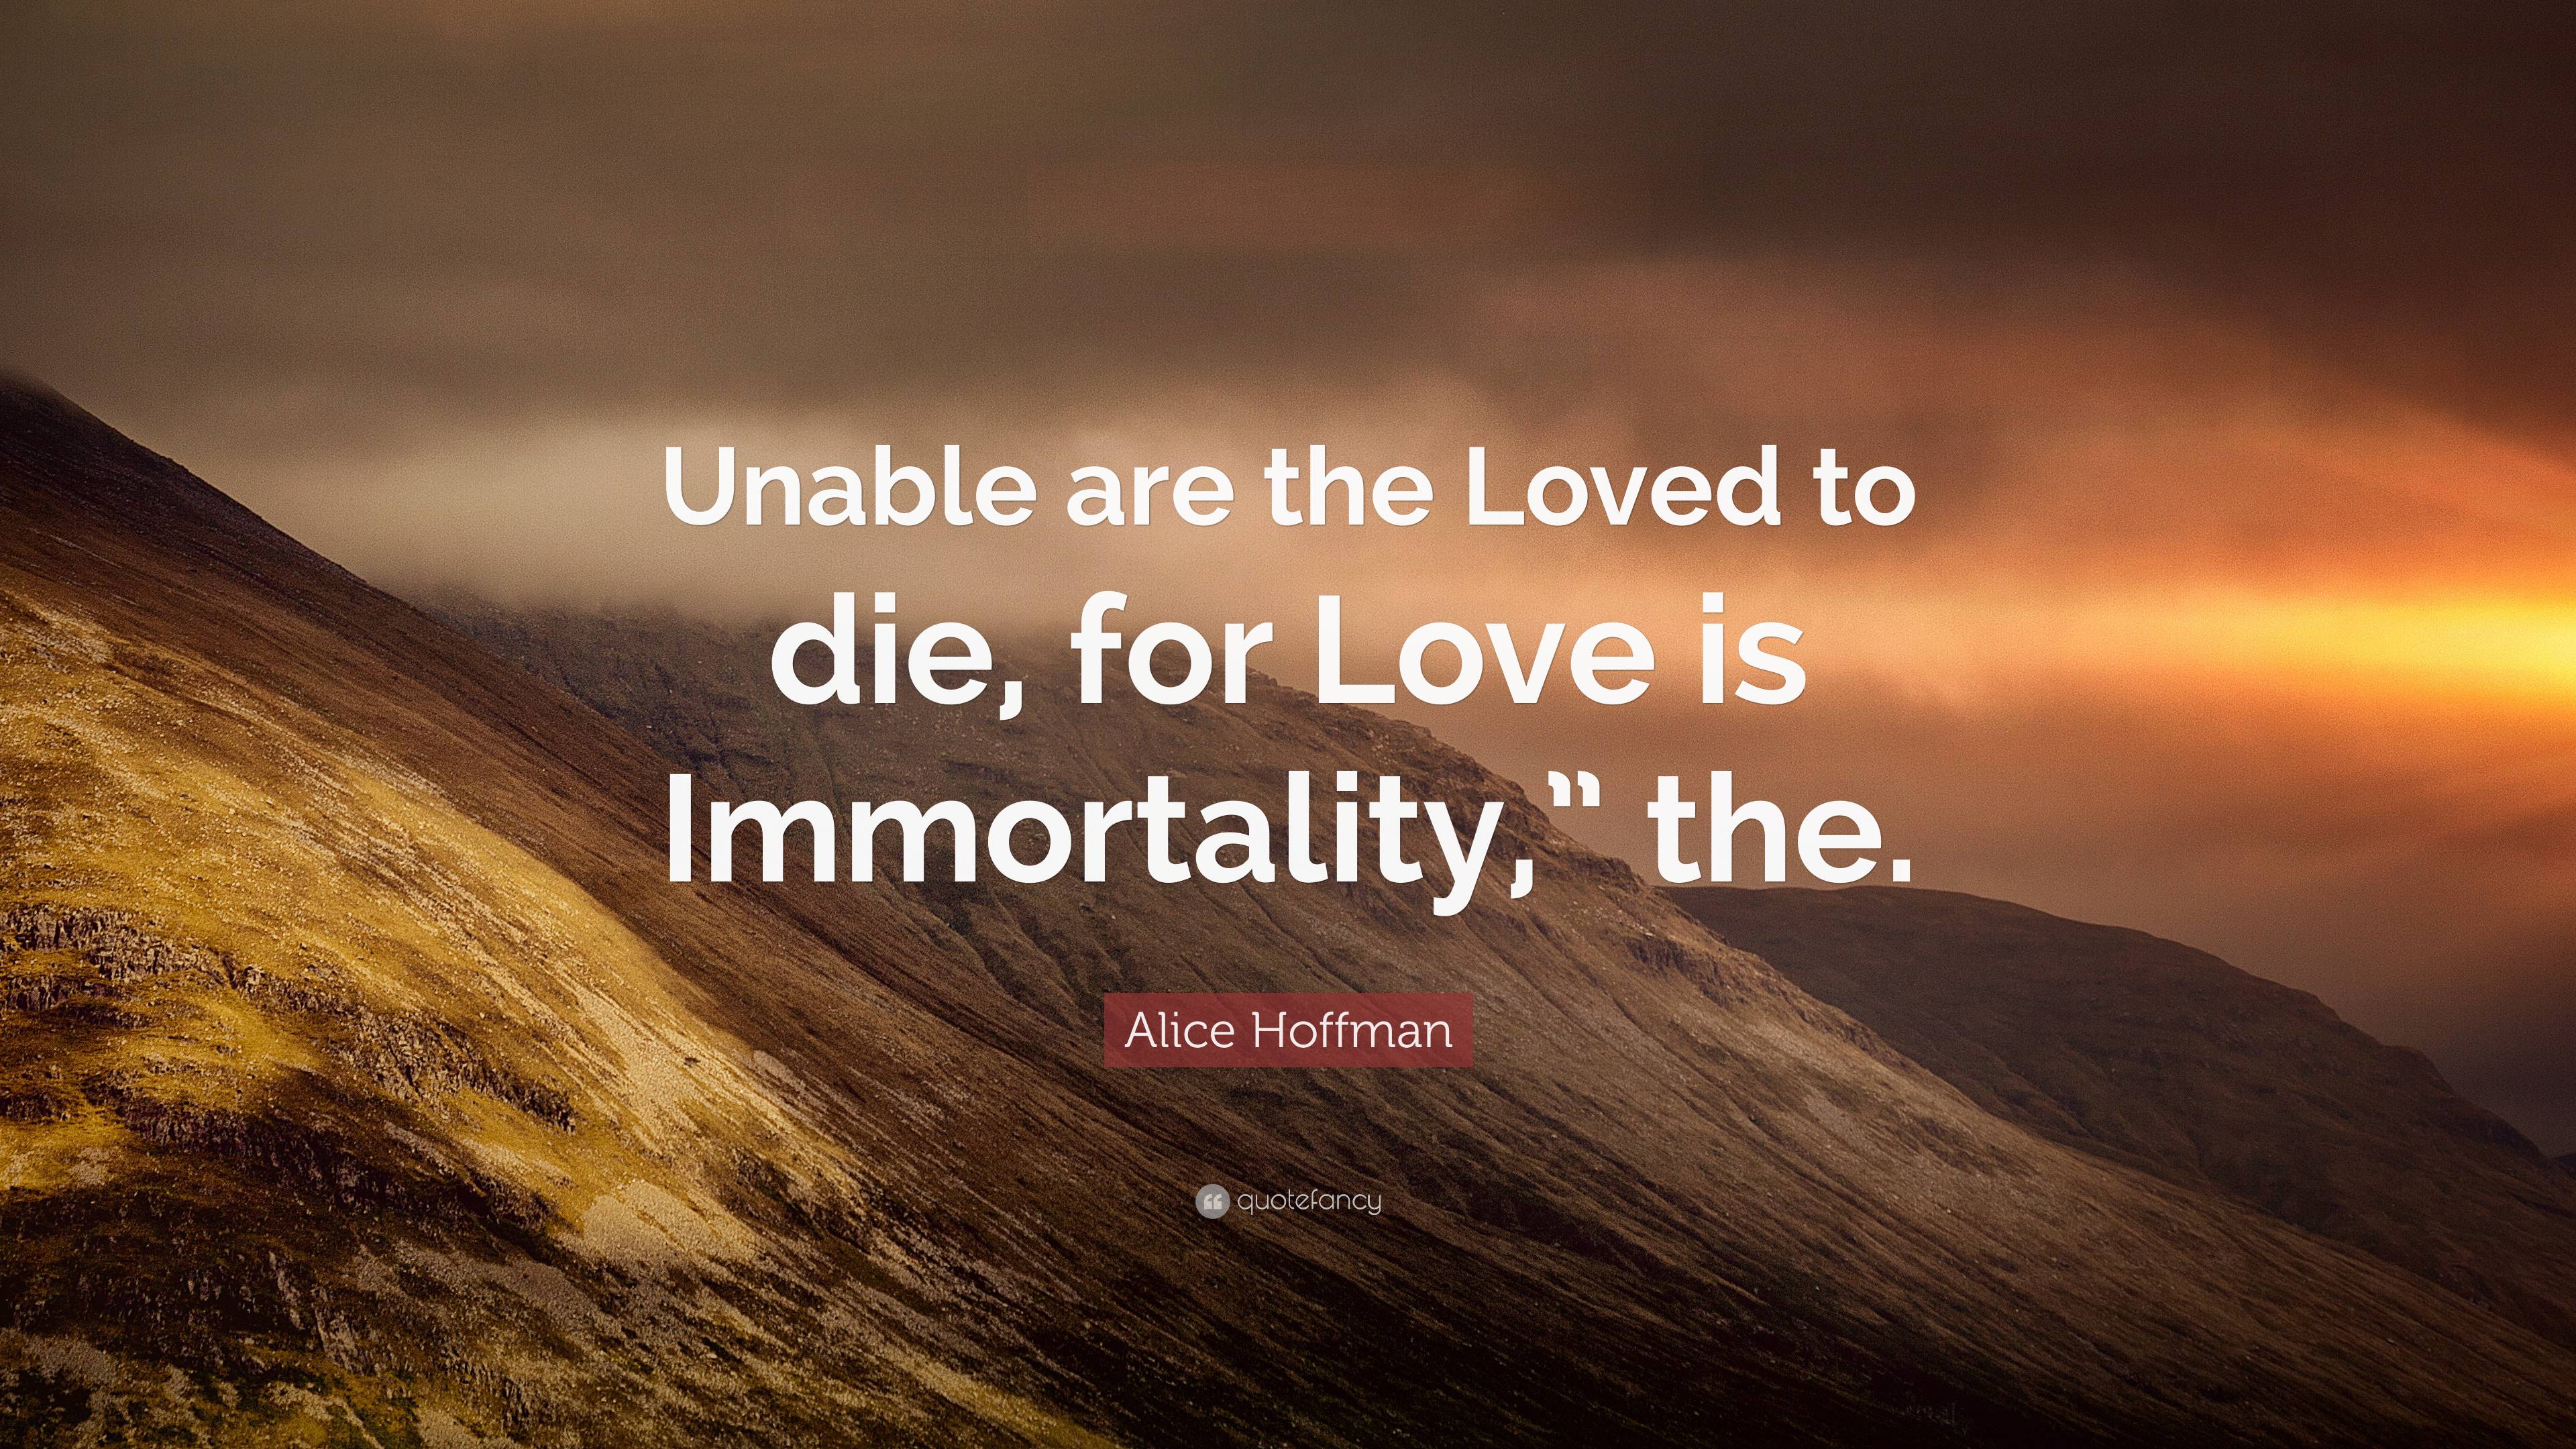 Alice Hoffman Quote: “Unable are the Loved to die, for Love is ...